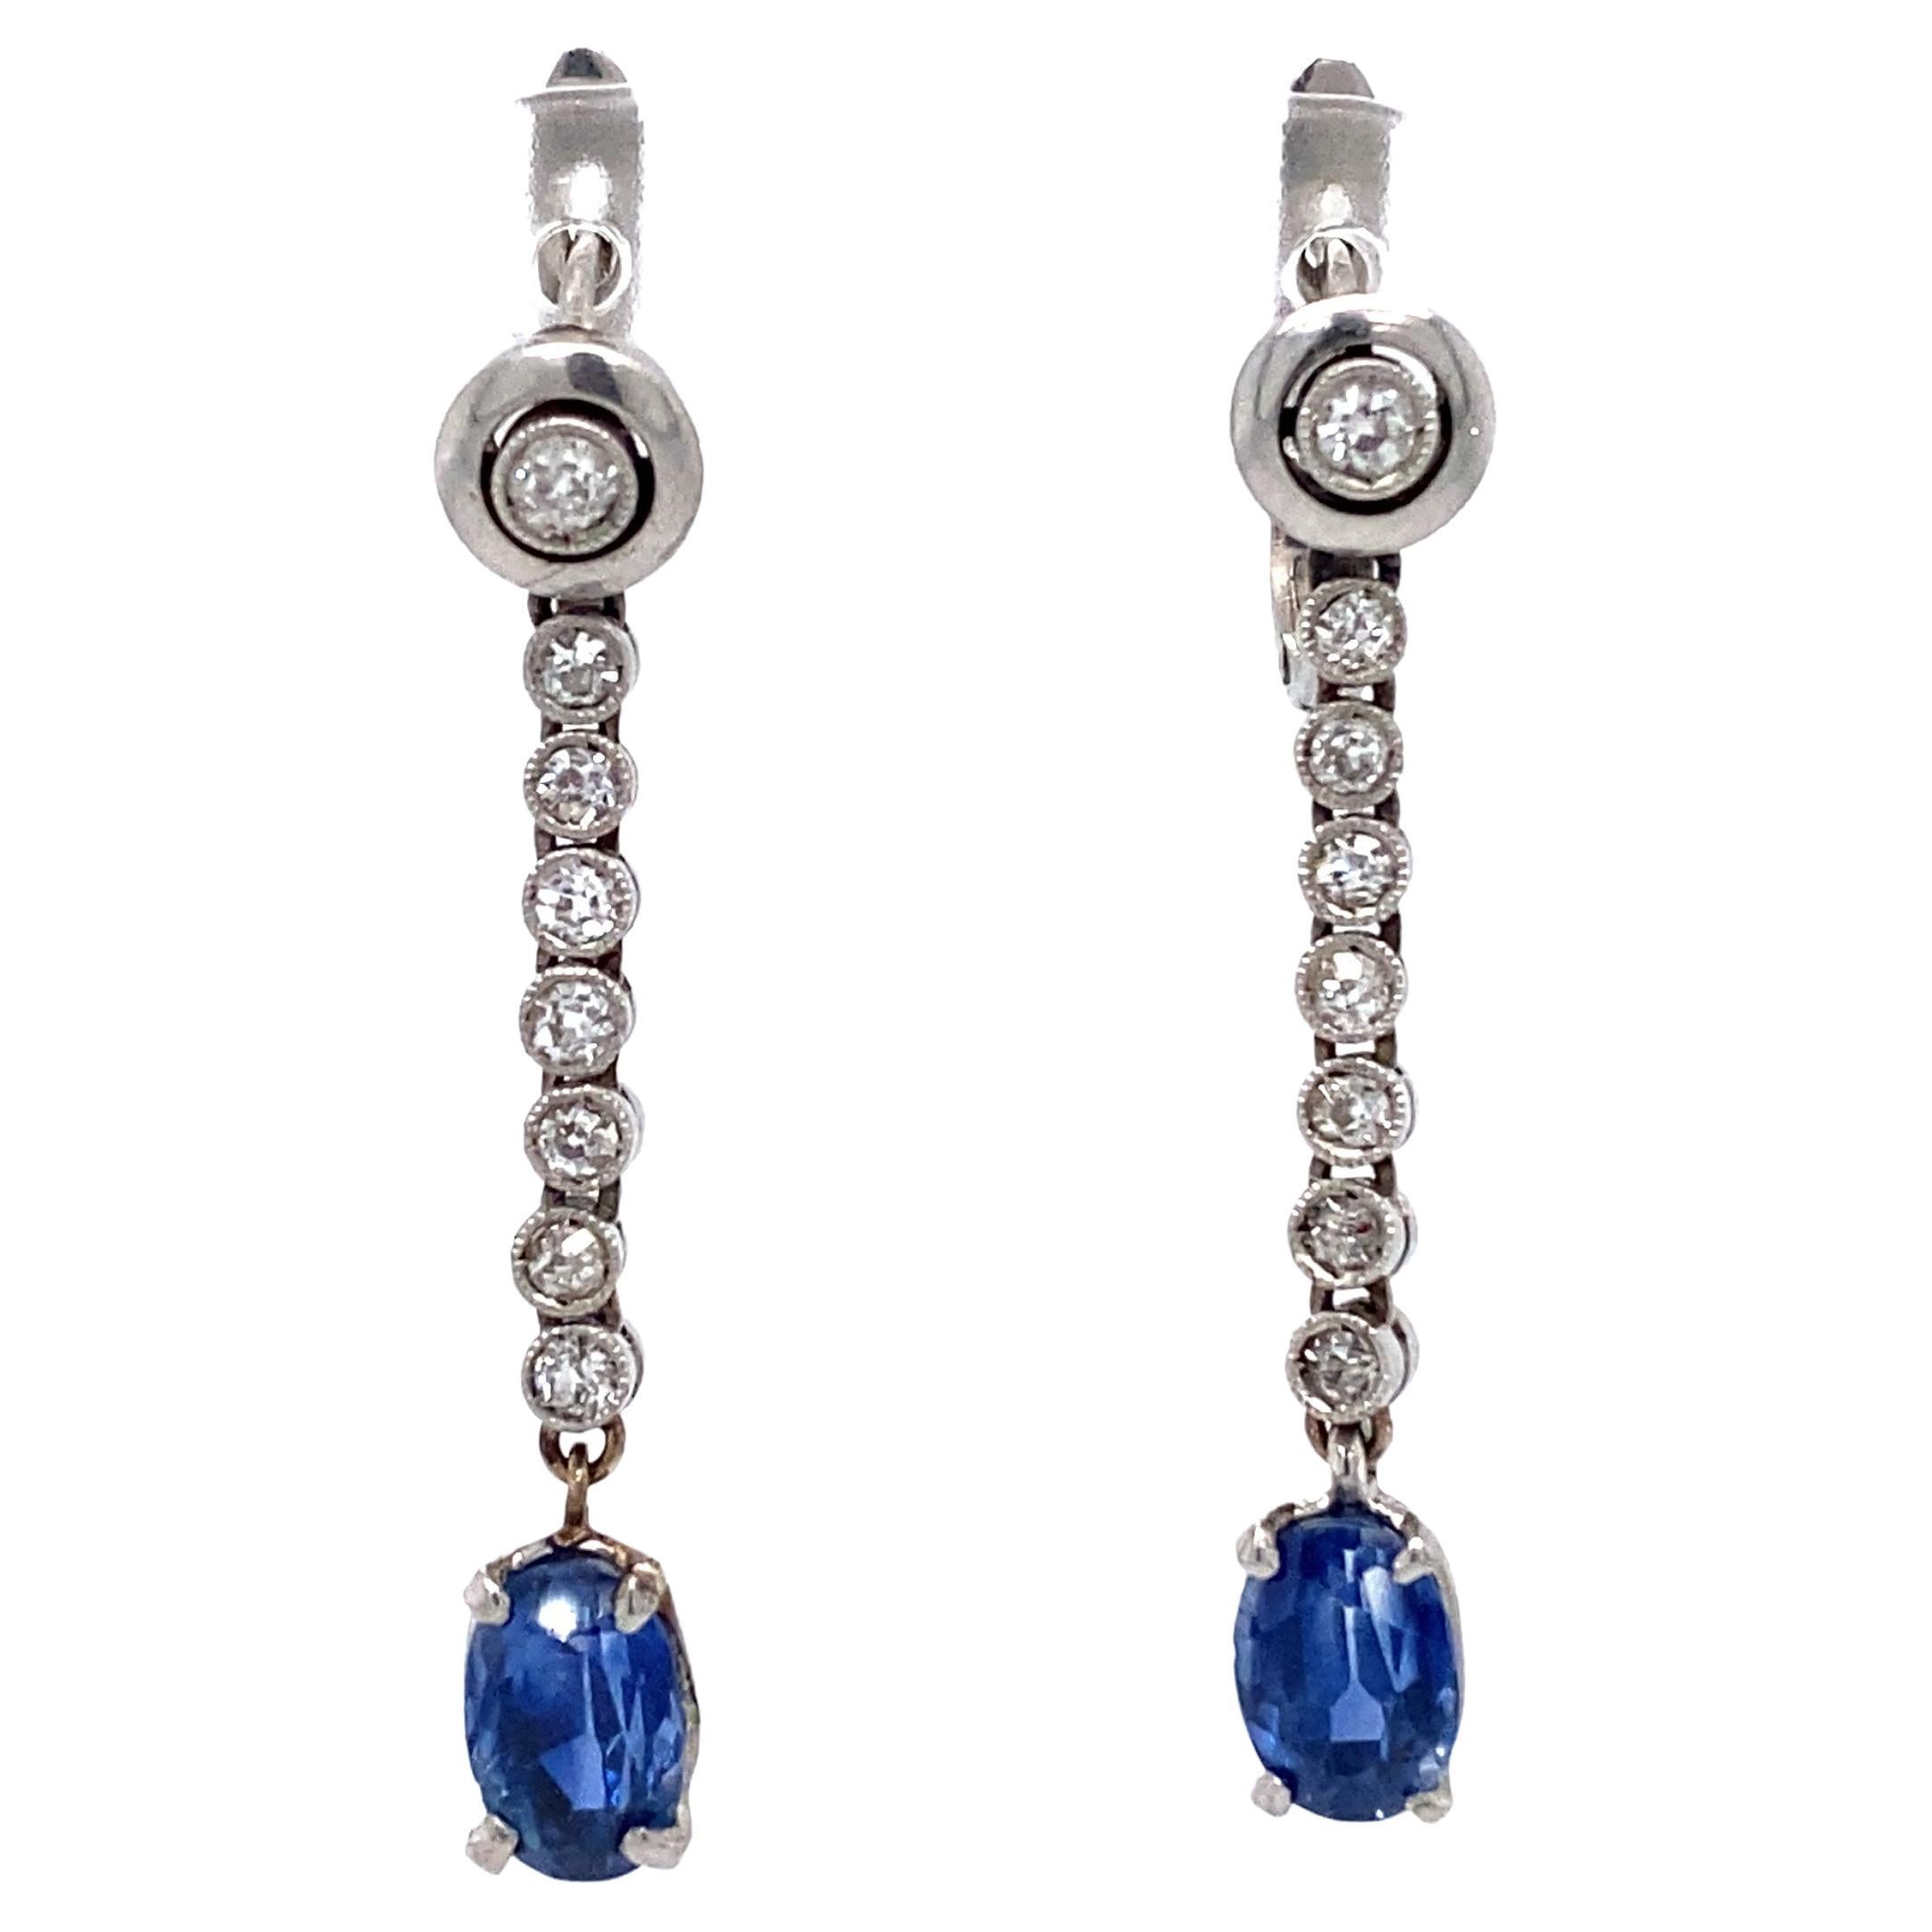 1980s 2.3 Carat Sapphire and Diamond Earrings in 14K White Gold and Platinum For Sale